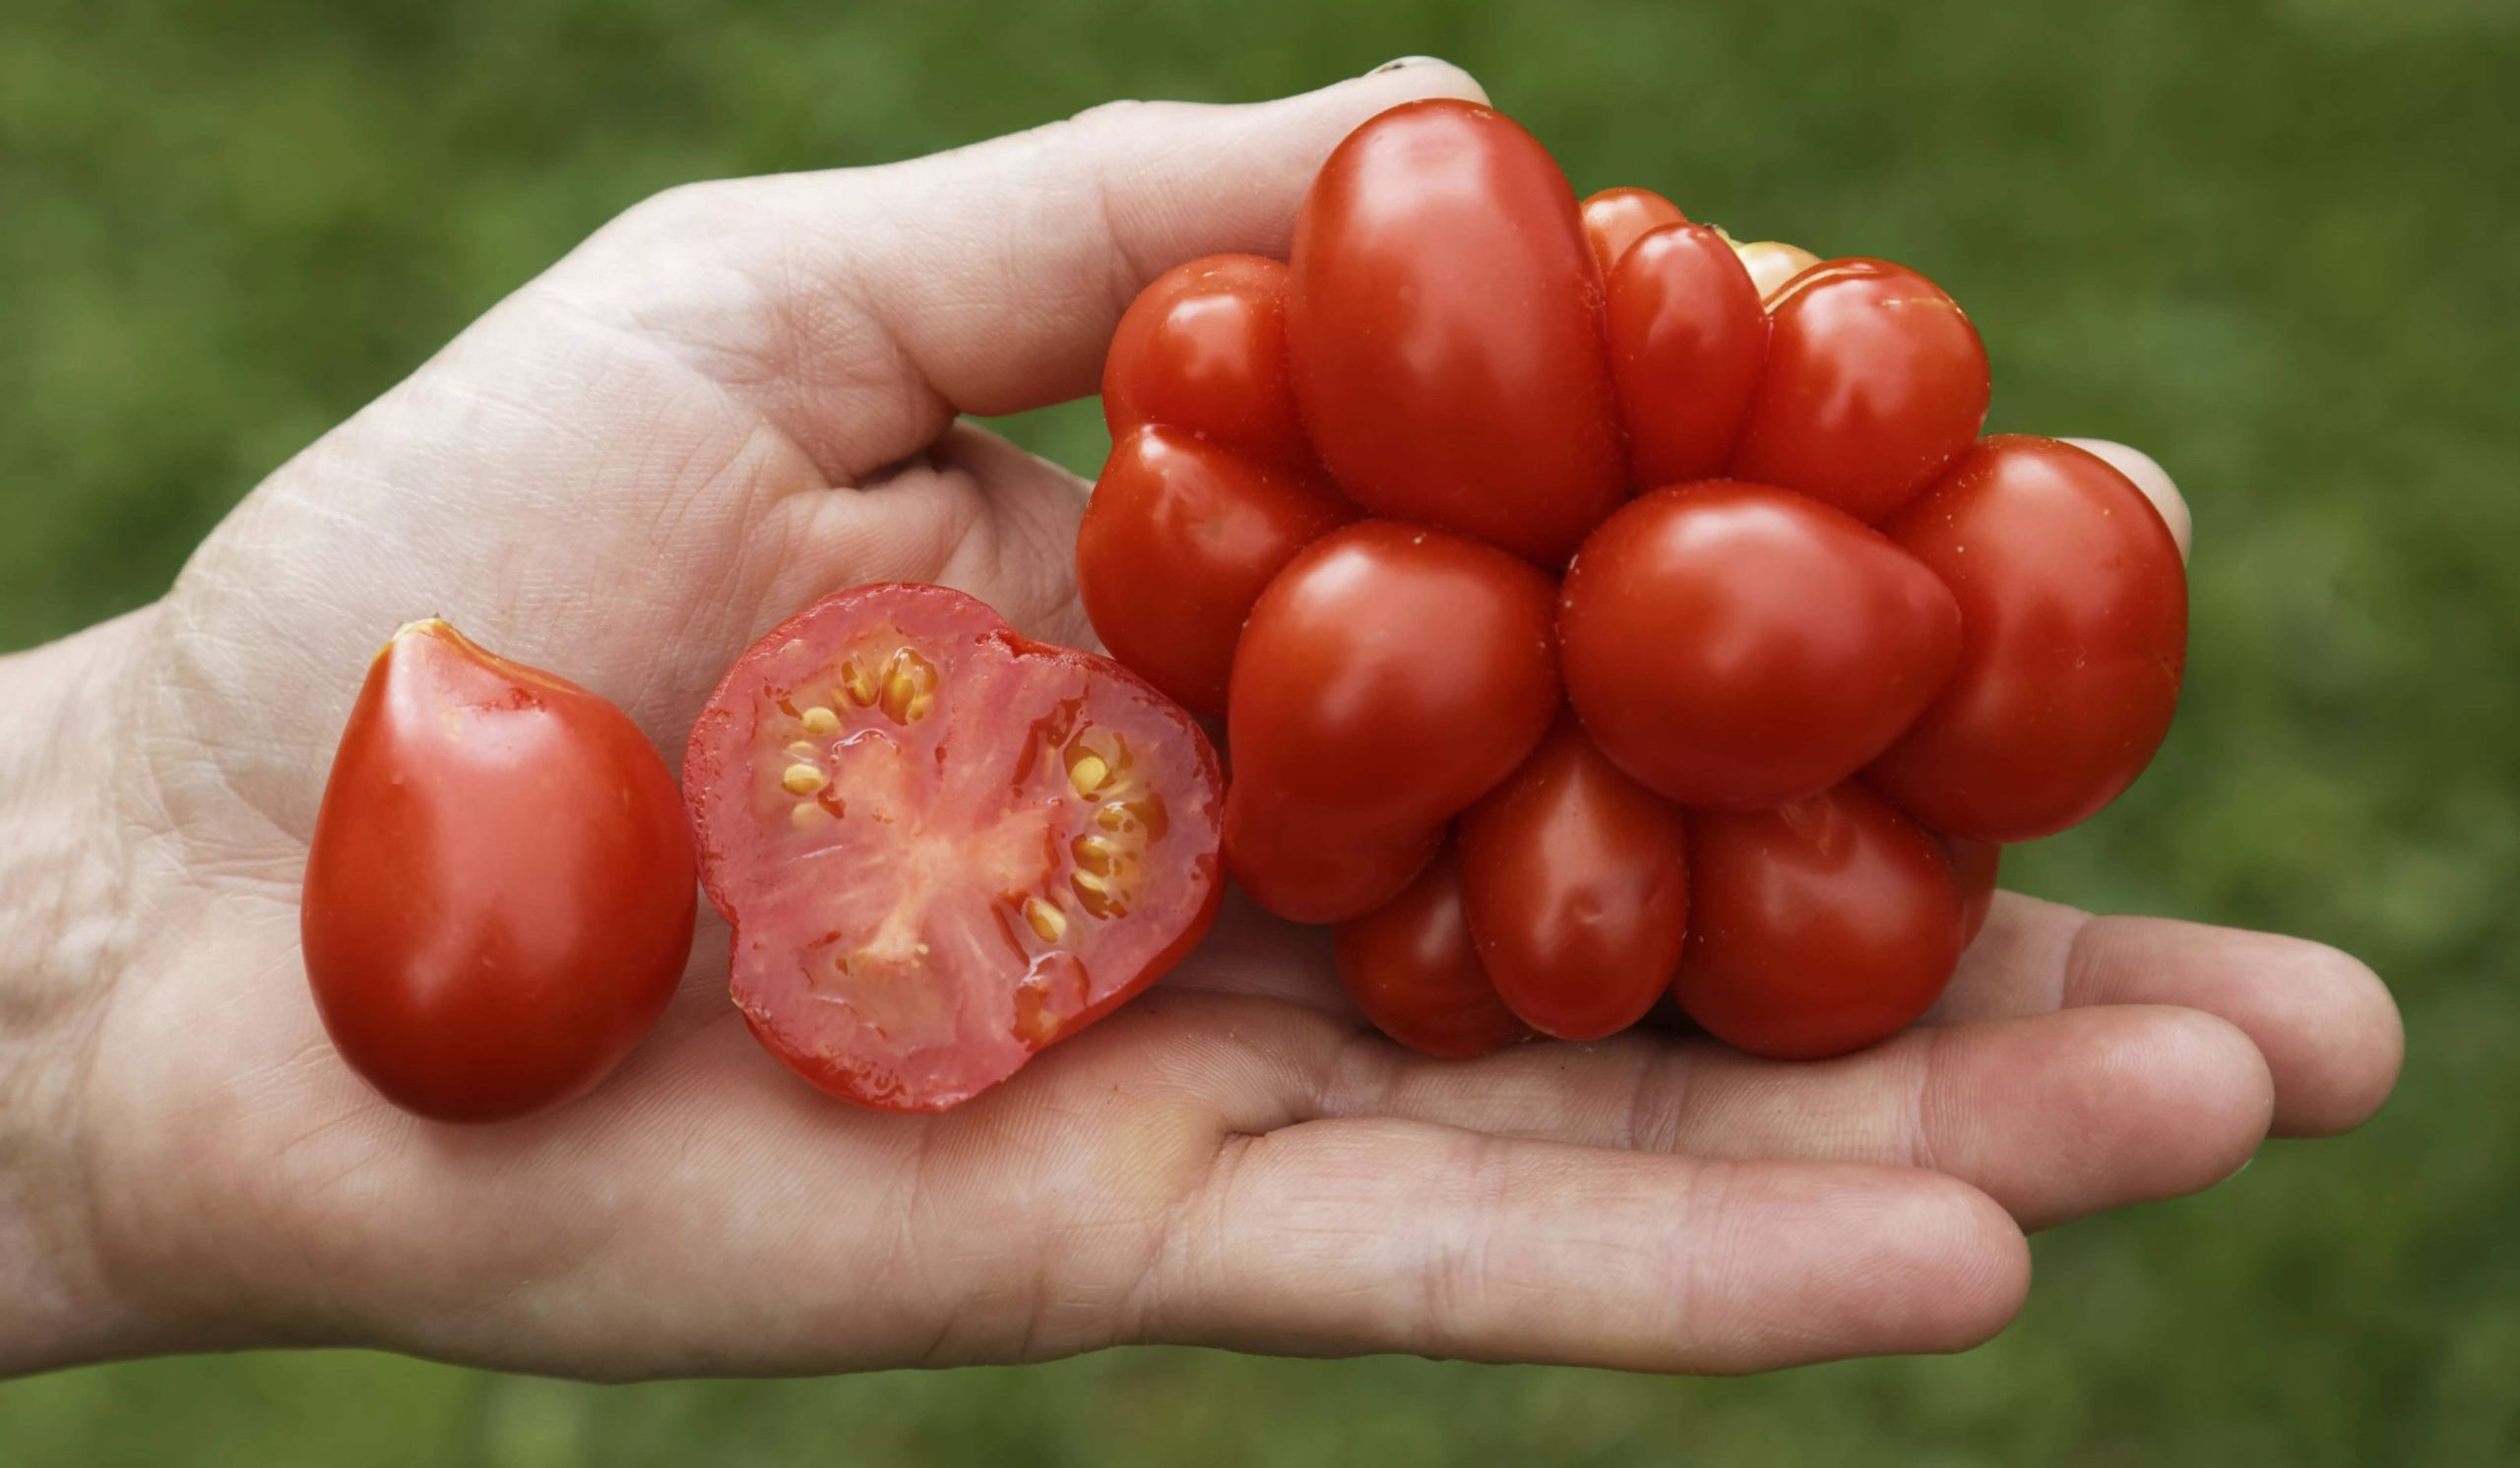  Price and Buy Tomato Benefits And Side Effects + Cheap Sale 